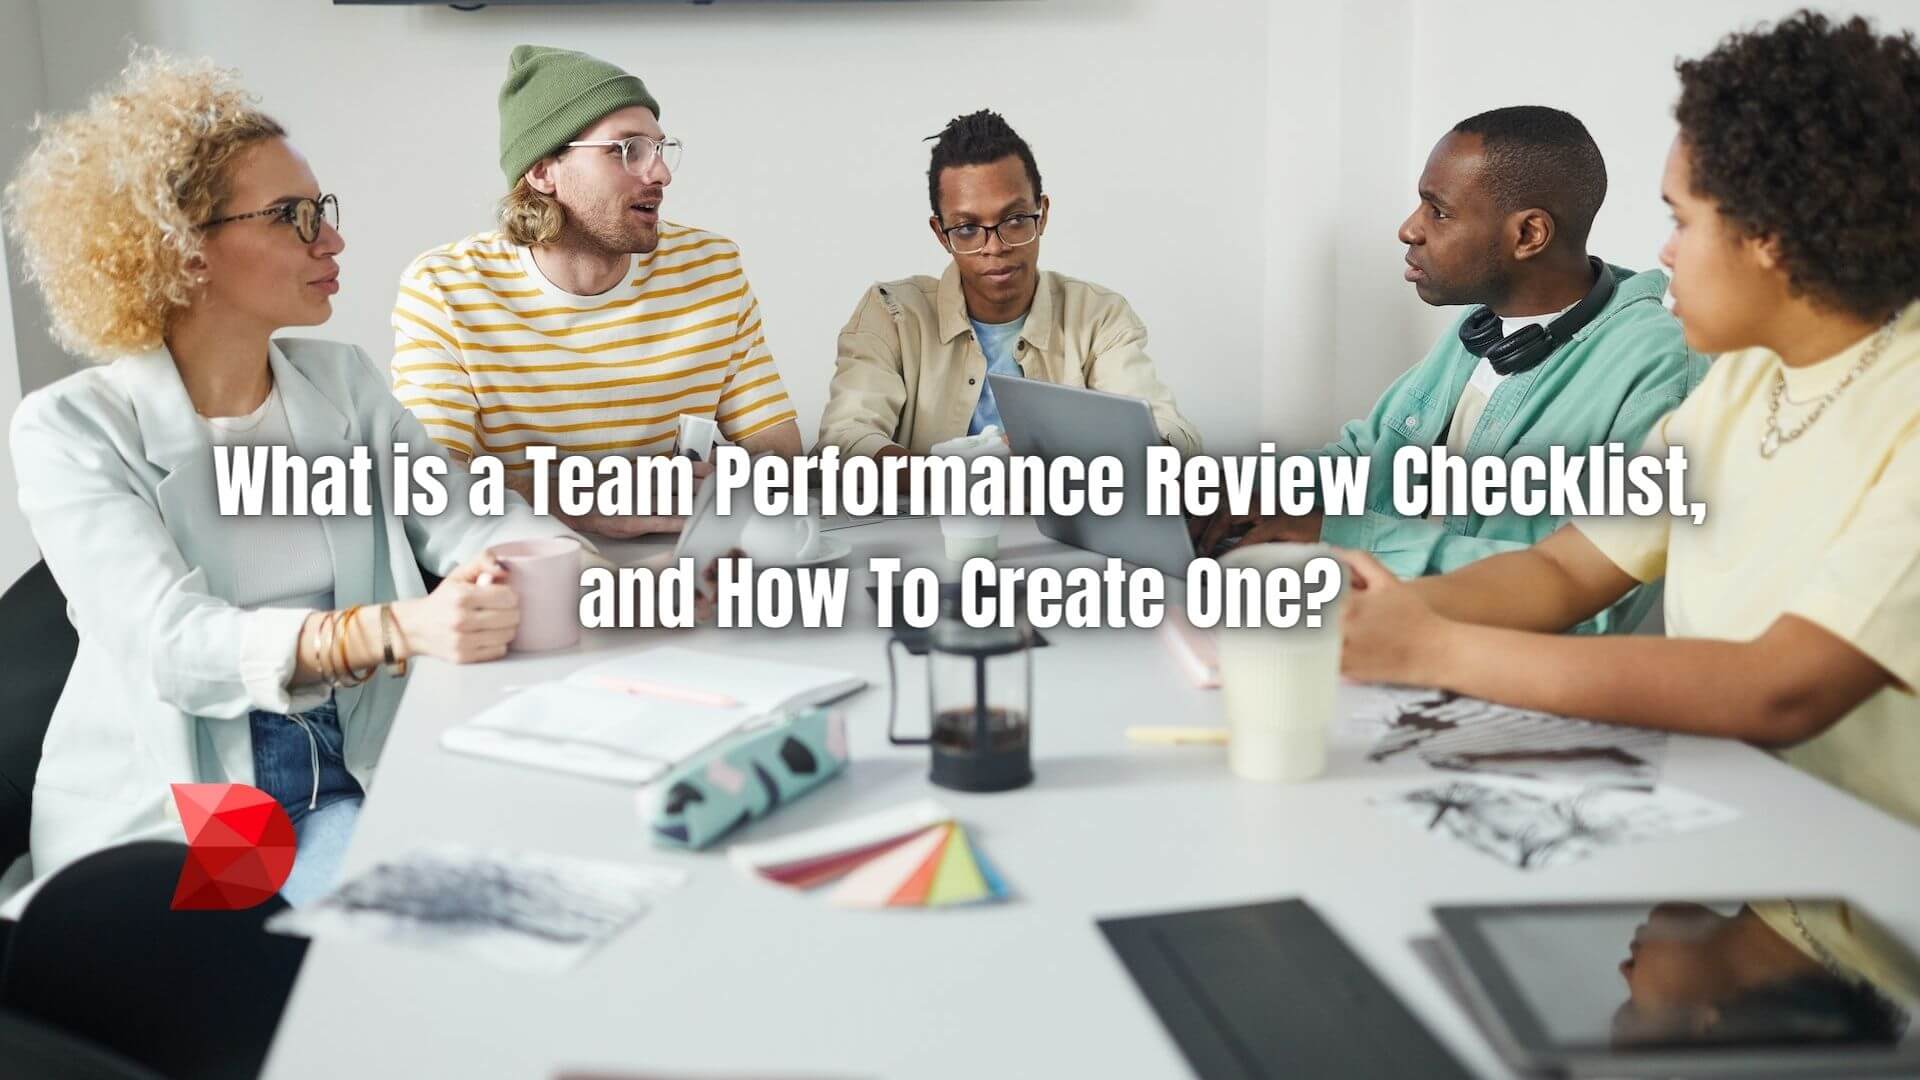 A team performance review checklist ensures that all relevant aspects of a team's performance are evaluated. Here's how to create one!